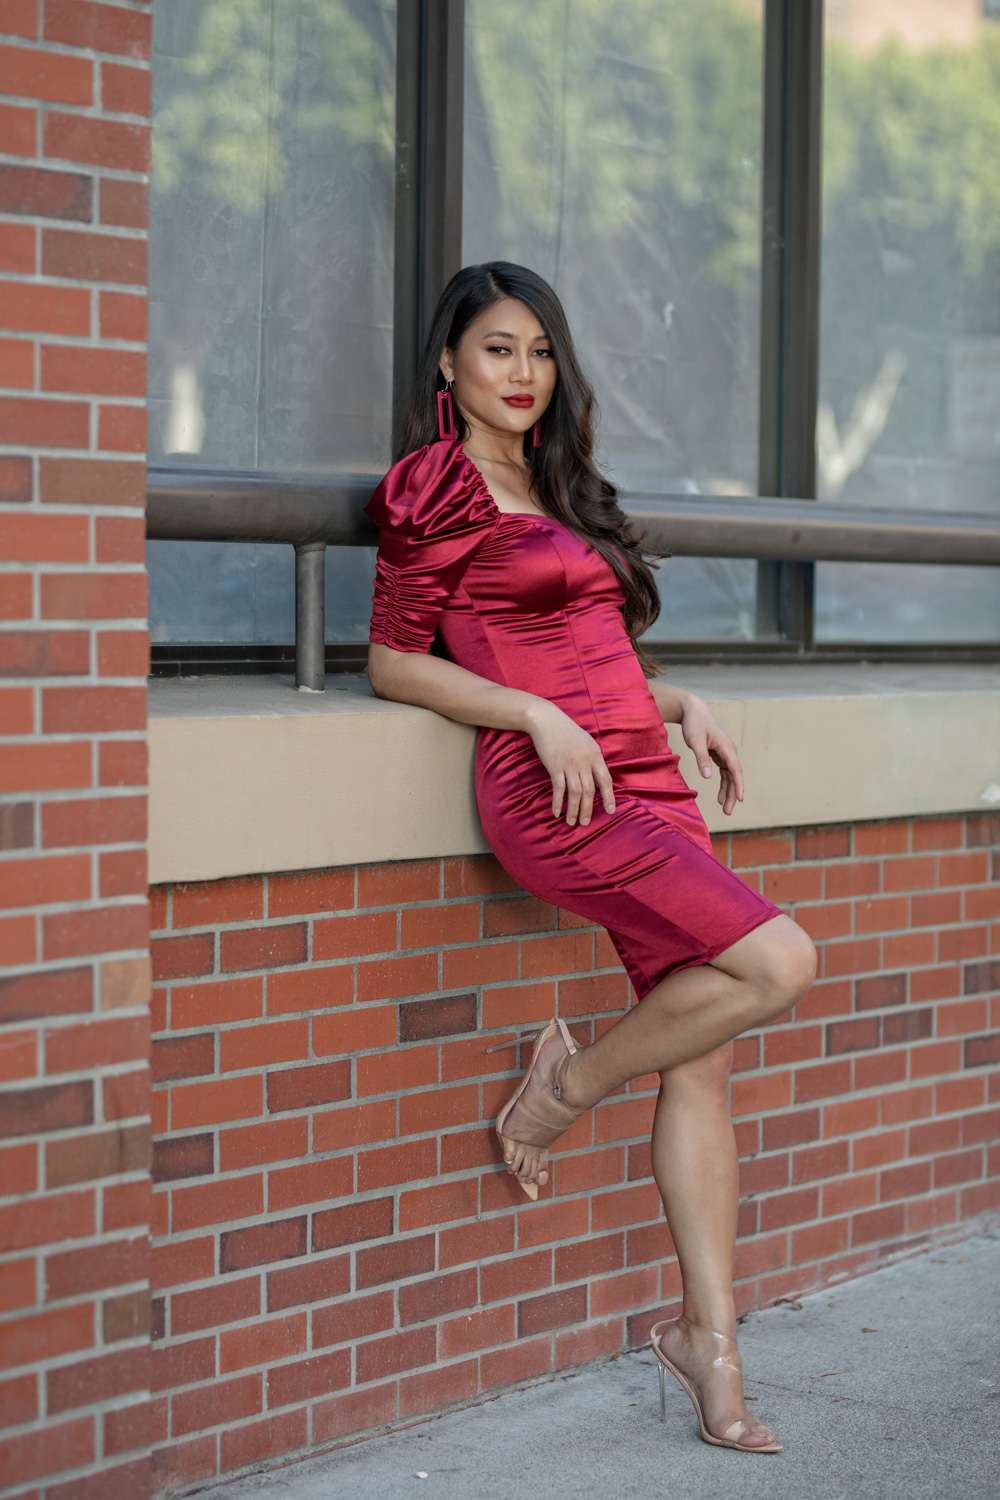 Pics by the Bricks with Asia – Rey Marquez Photo